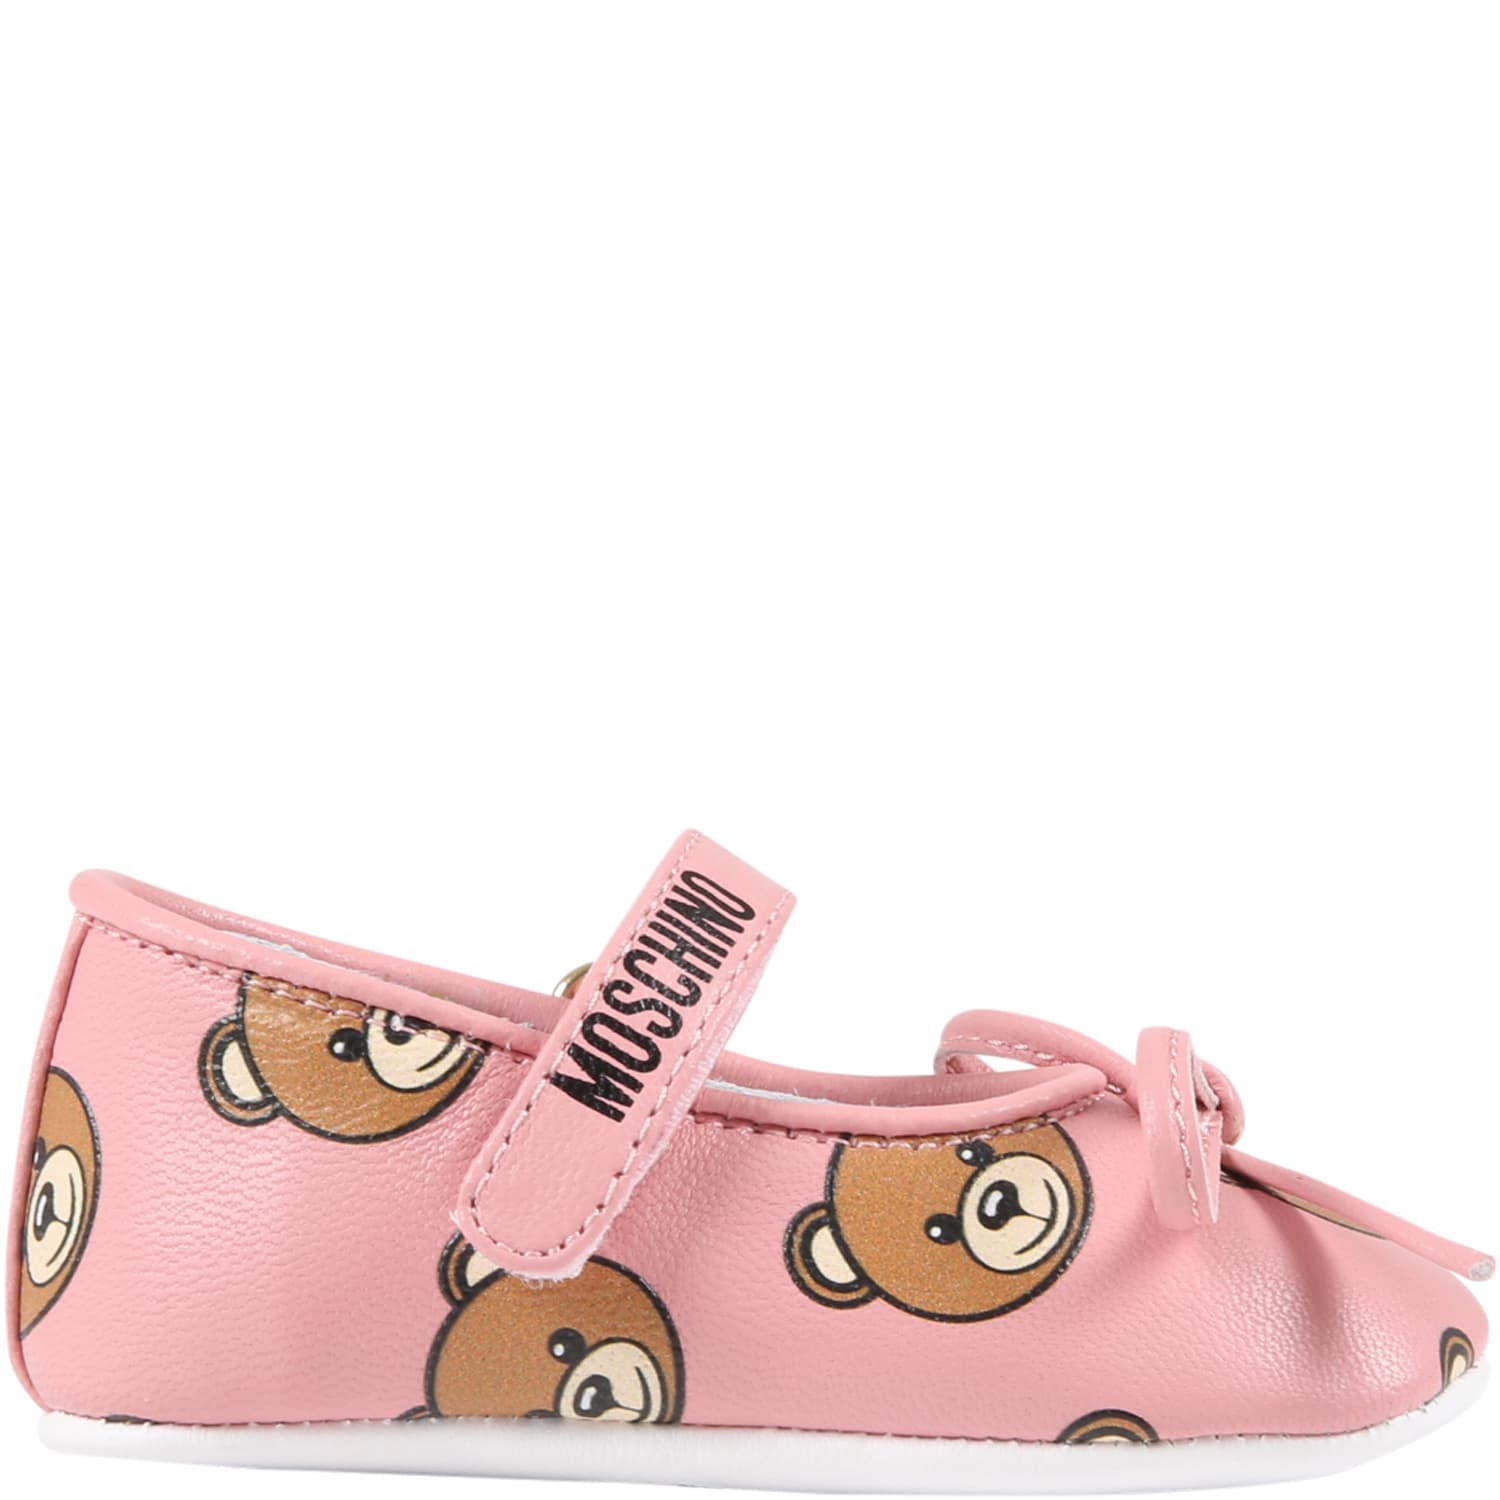 Moschino Pink Ballet-flats For Baby Girl With Teddy Bear And Bow